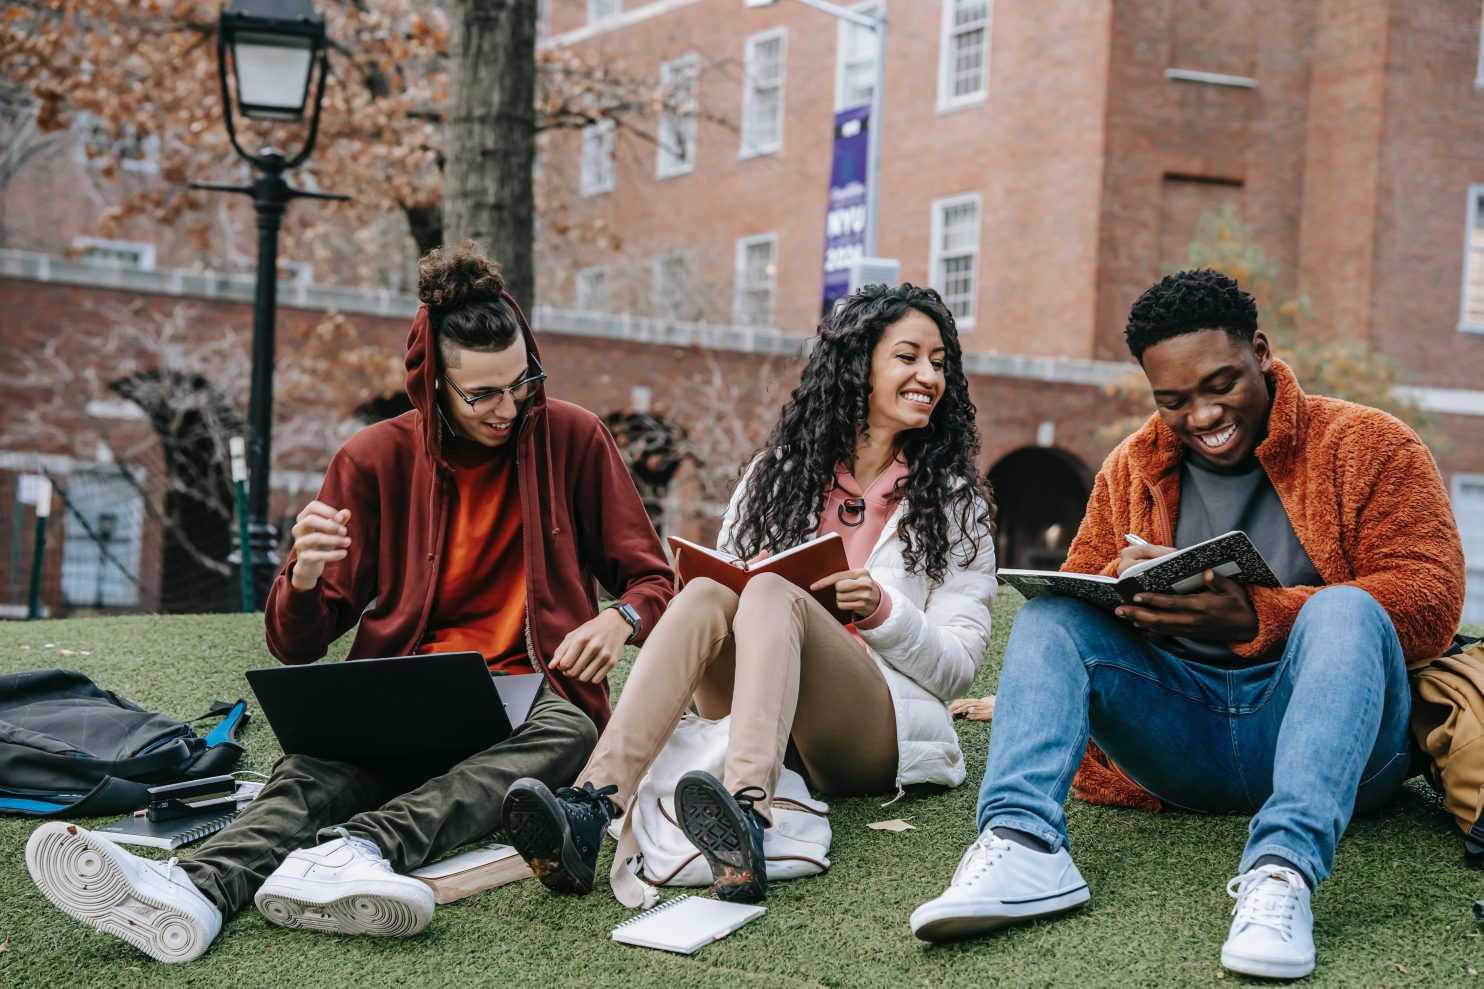 A group of students sitting outside on some grass, looking at books and laughing